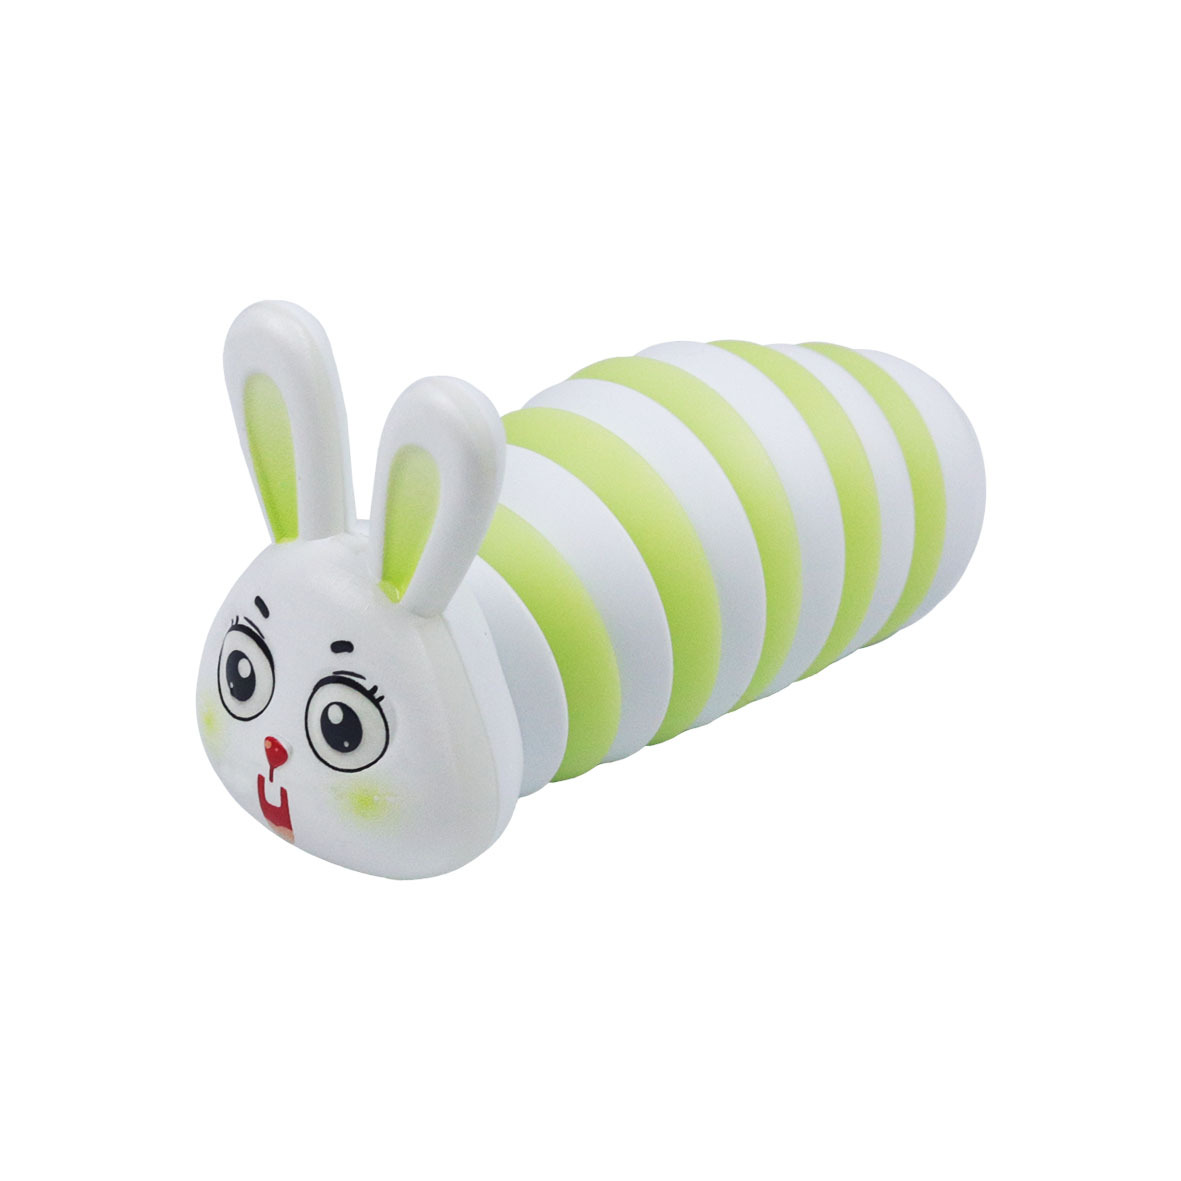 Wholesale Foreign Trade Cross-Border New Product Pressure Reduction Toy Shake Rabbit Luminous Environmentally Friendly Material Color Matching Slug Parent-Child Puzzle